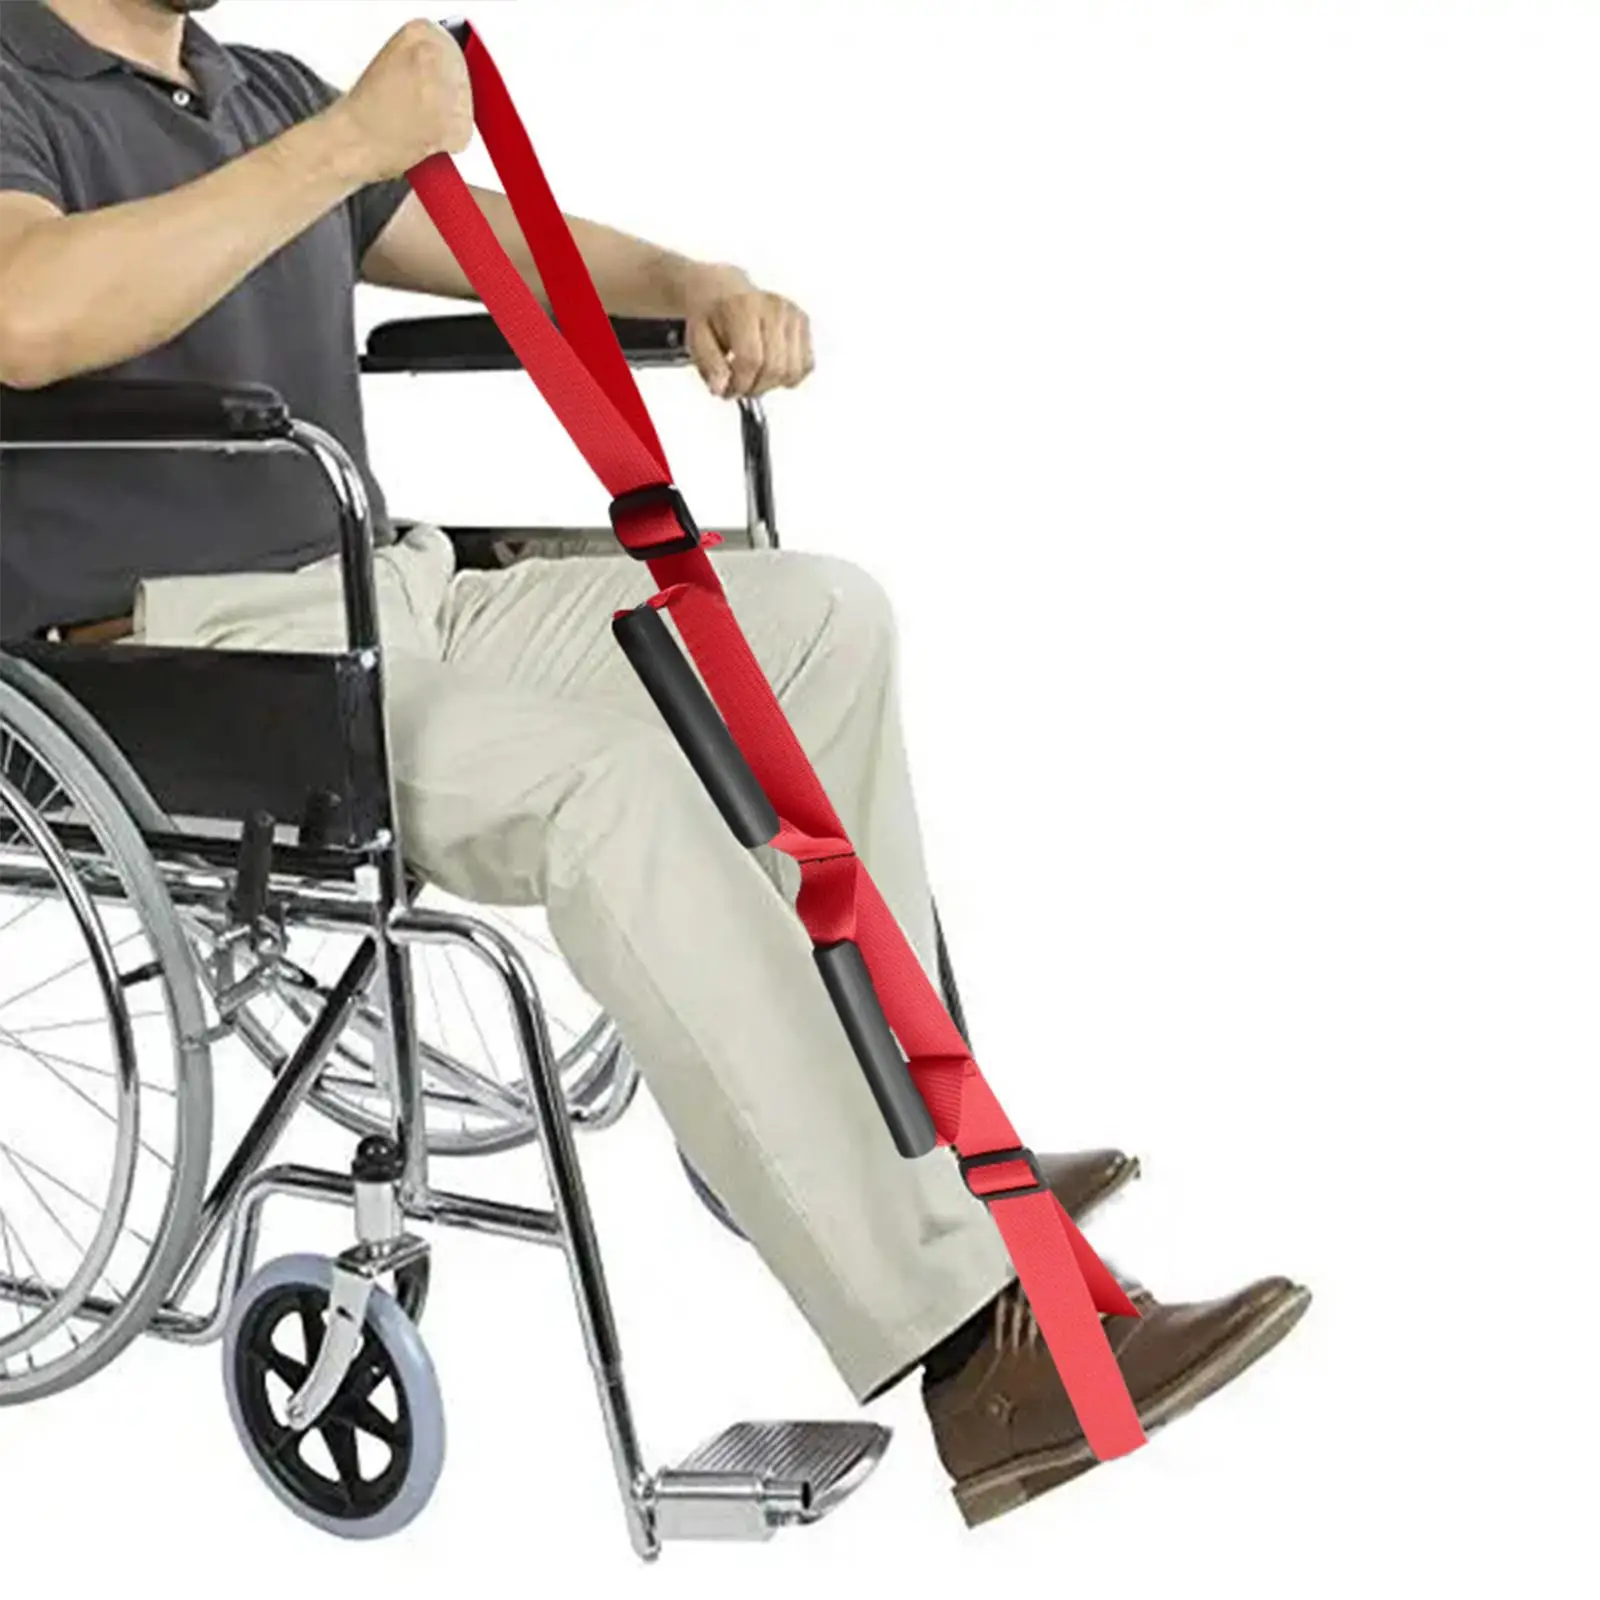 Long Leg Lifter Strap Durable Leg Lifter Assist Multiple Handles Moving Tool Foot Loop for Seniors People with Limiting Mobility